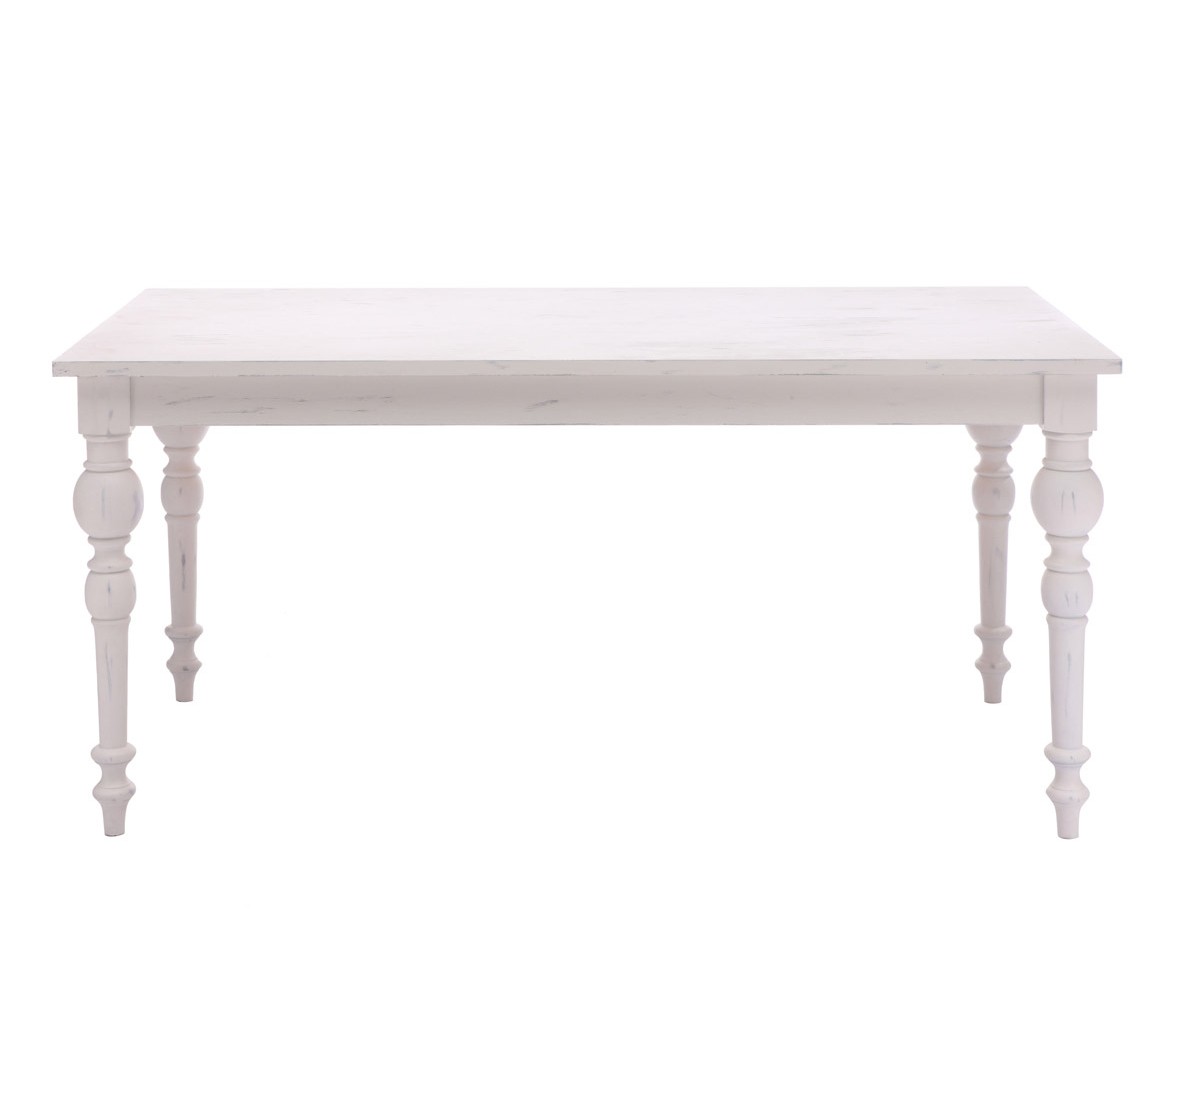 Zuo Modern Soma Dining Table - Antique White